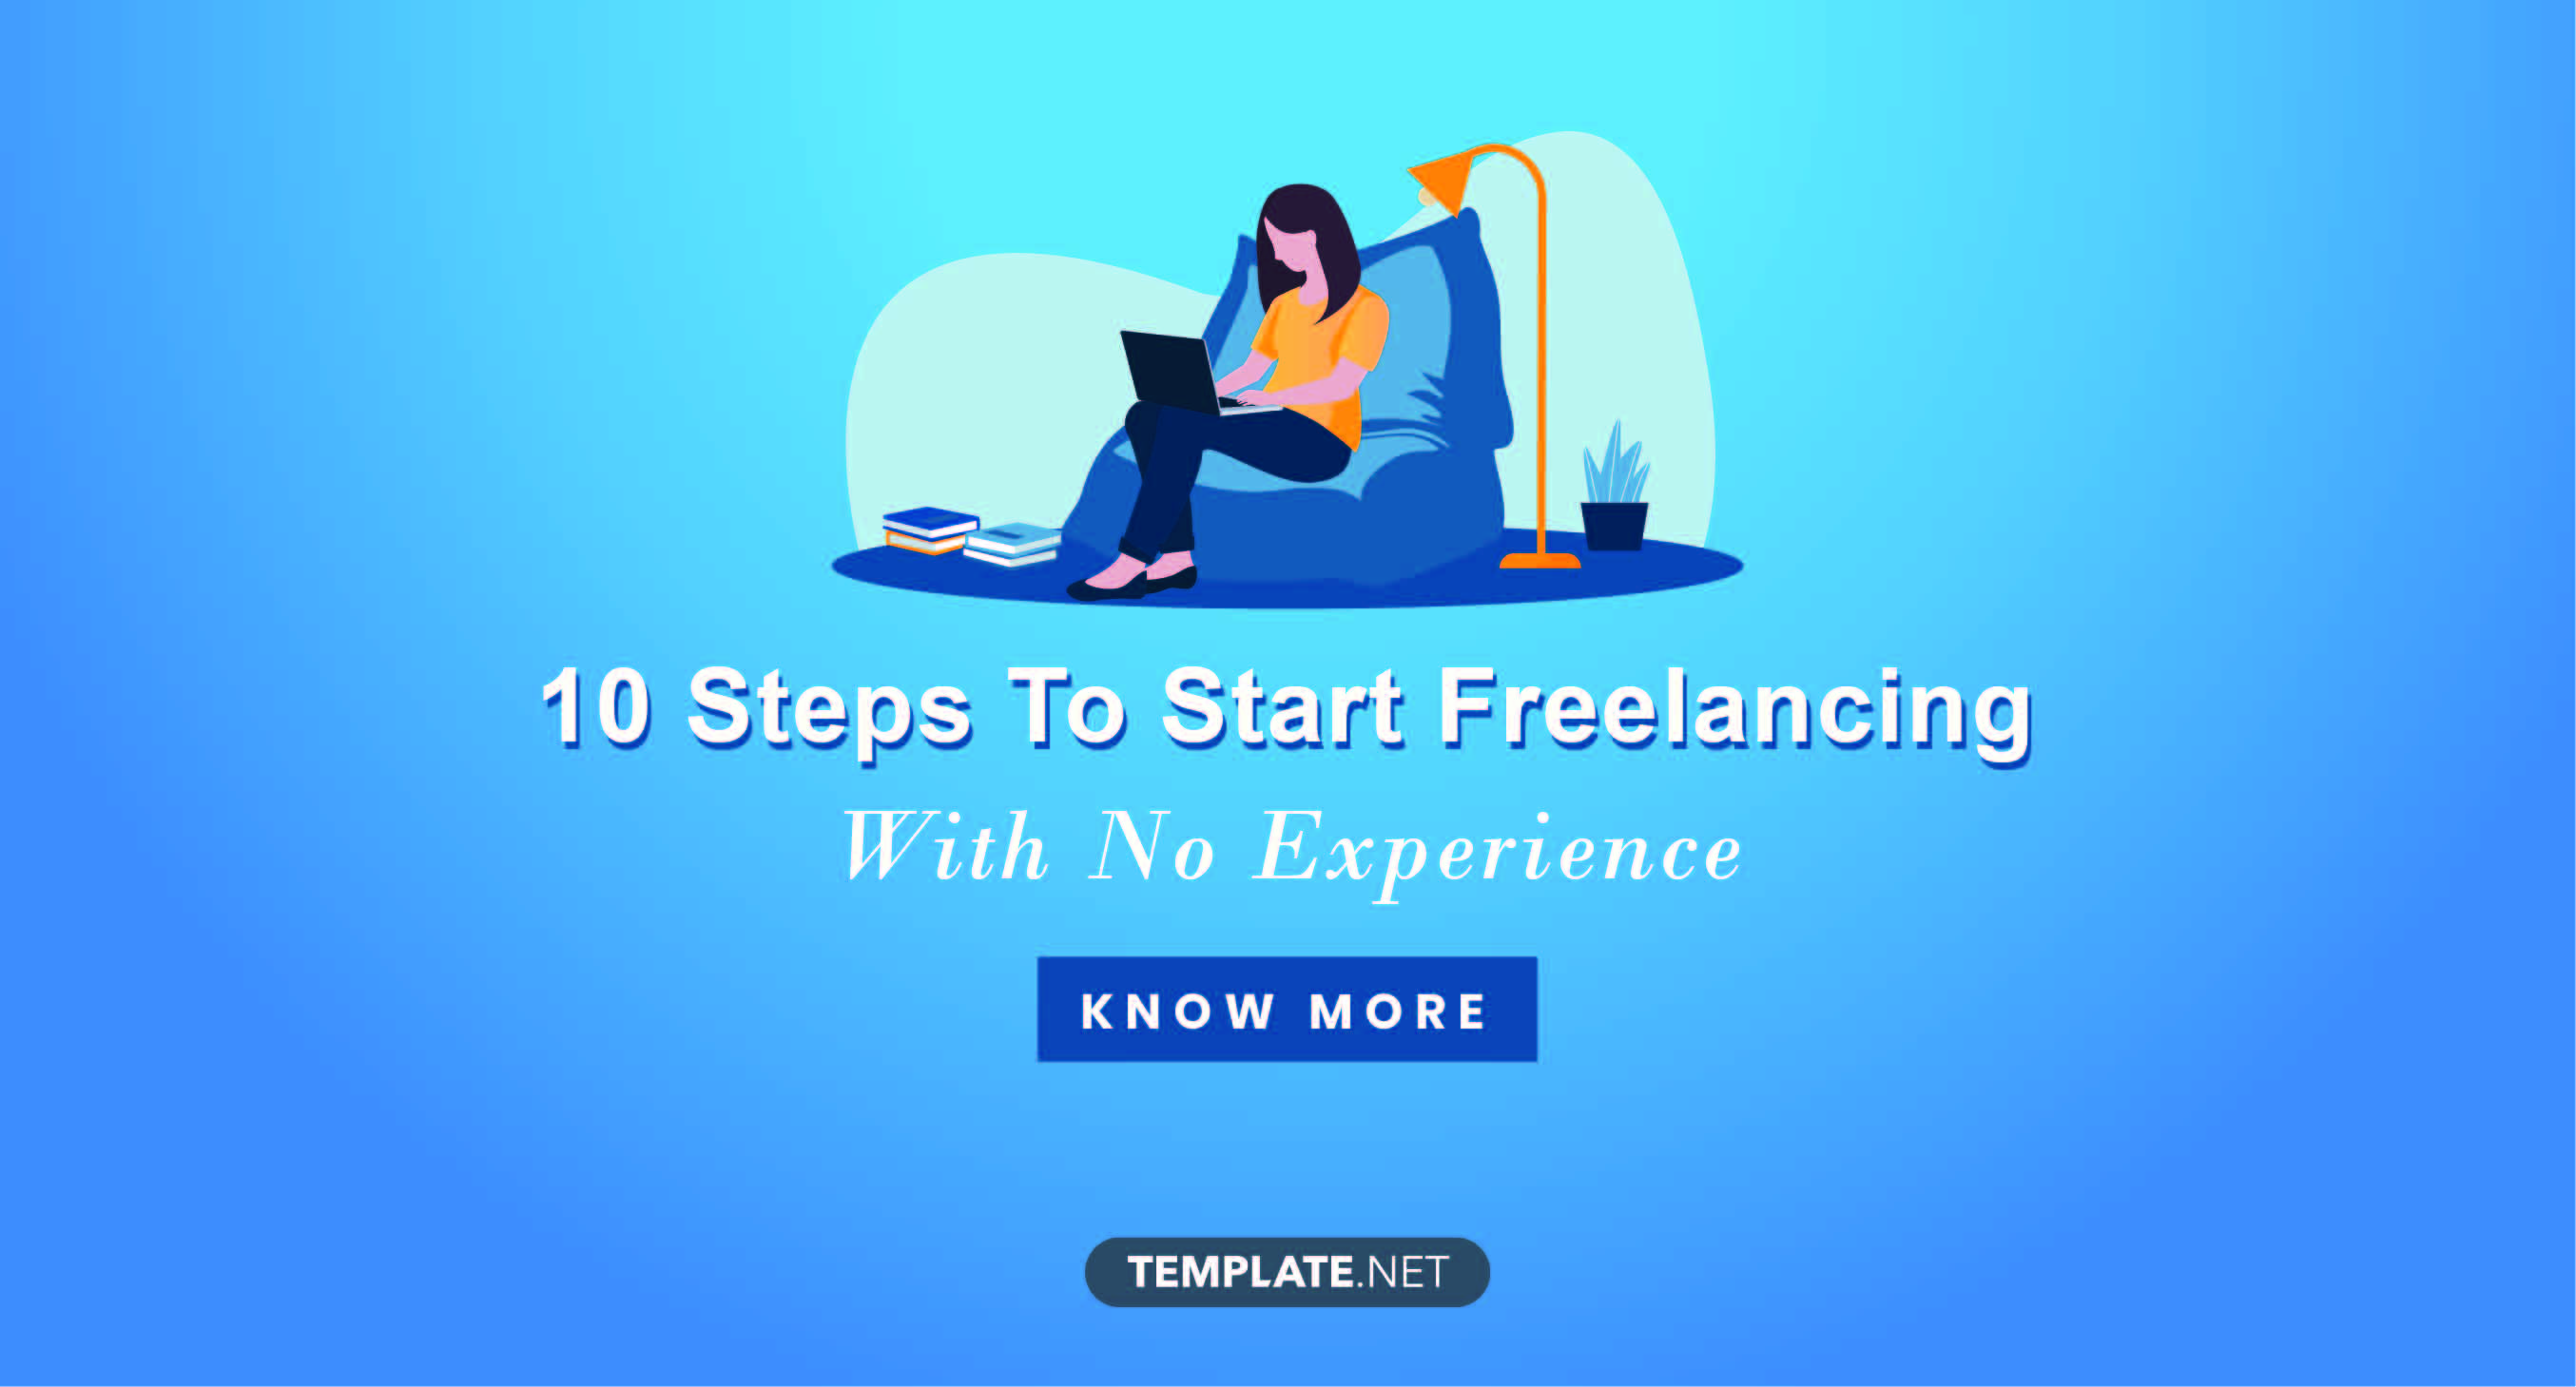 10-steps-to-start-freelancing-with-no-experience